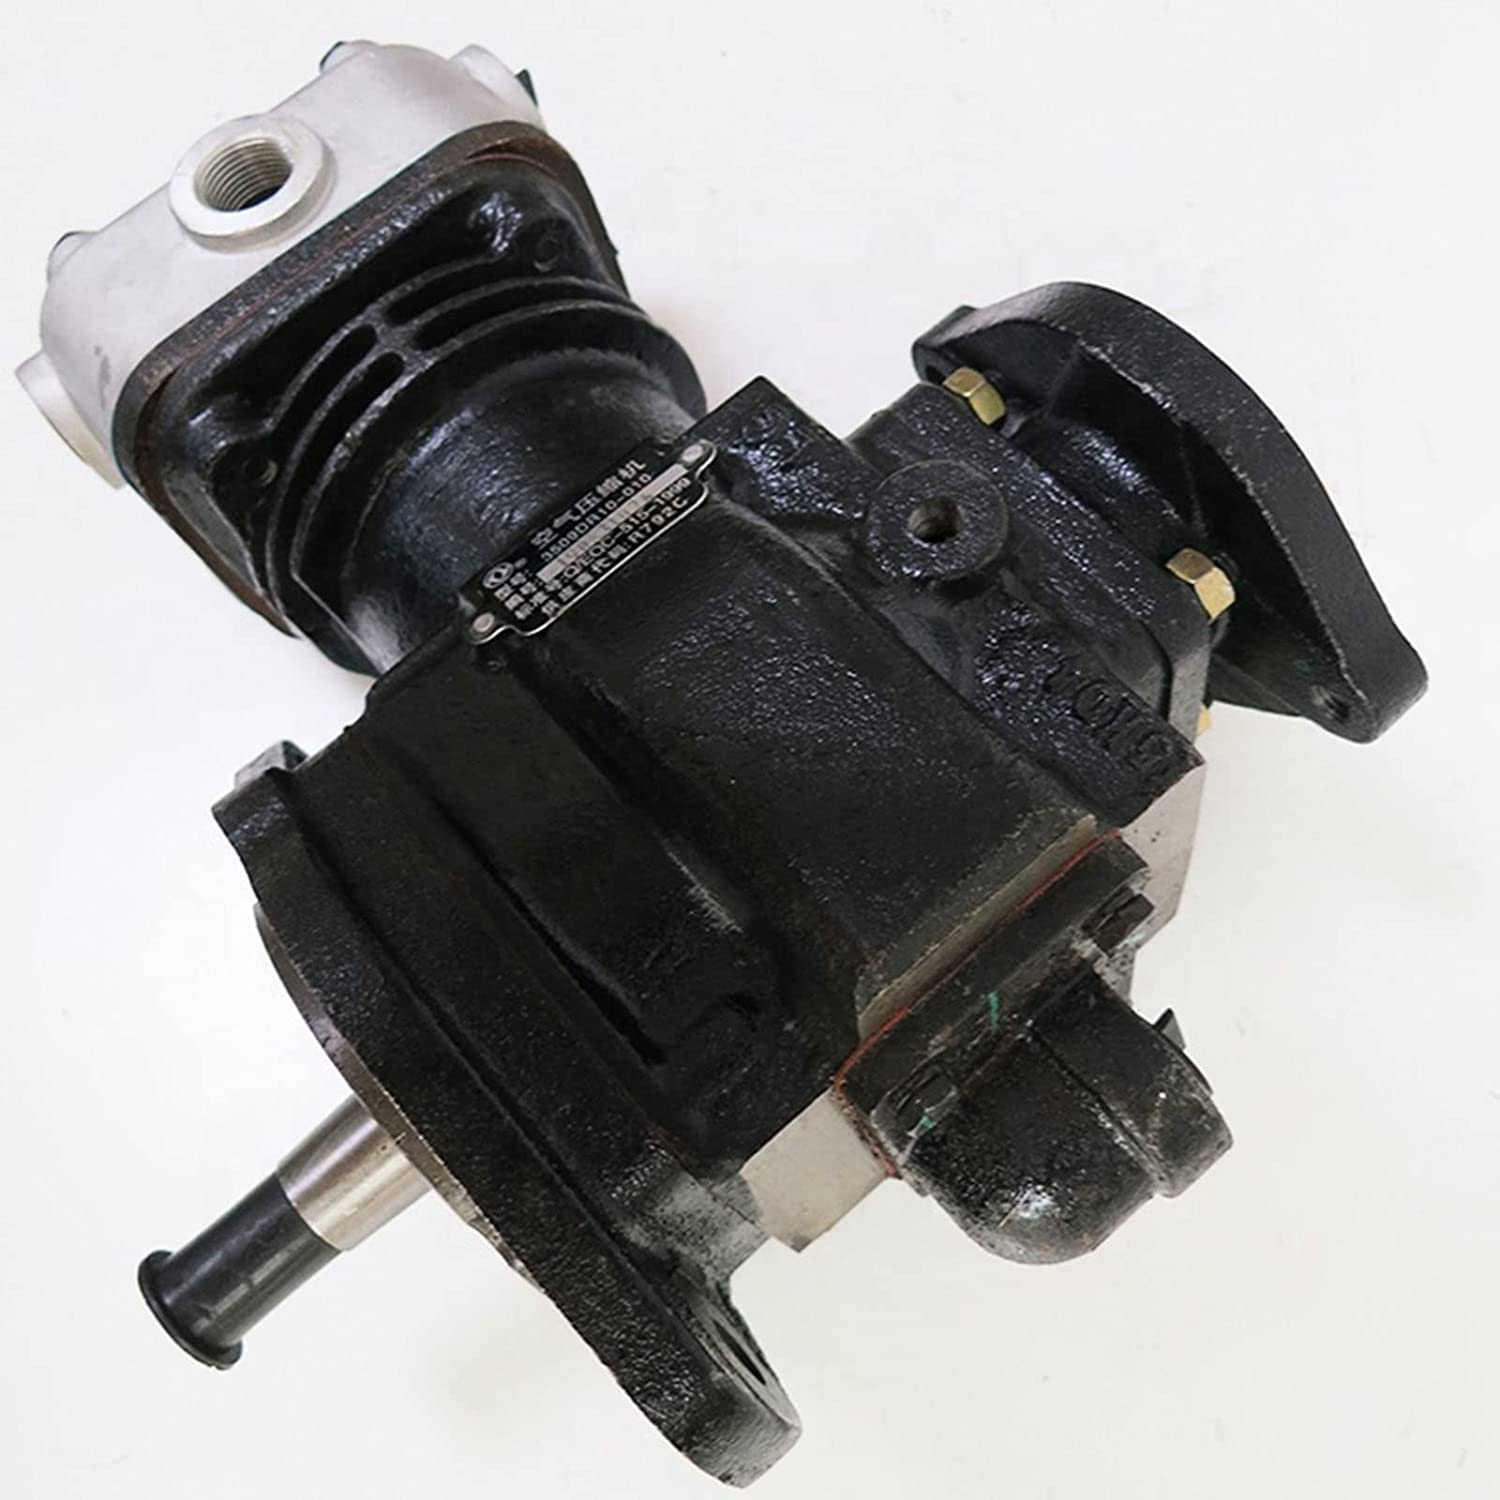 Seapple New Air Compressor Pump 3974548 A3974548 Compatible with Cummins 210/160 6BT 5.9L Diesel Engine - image 2 of 6